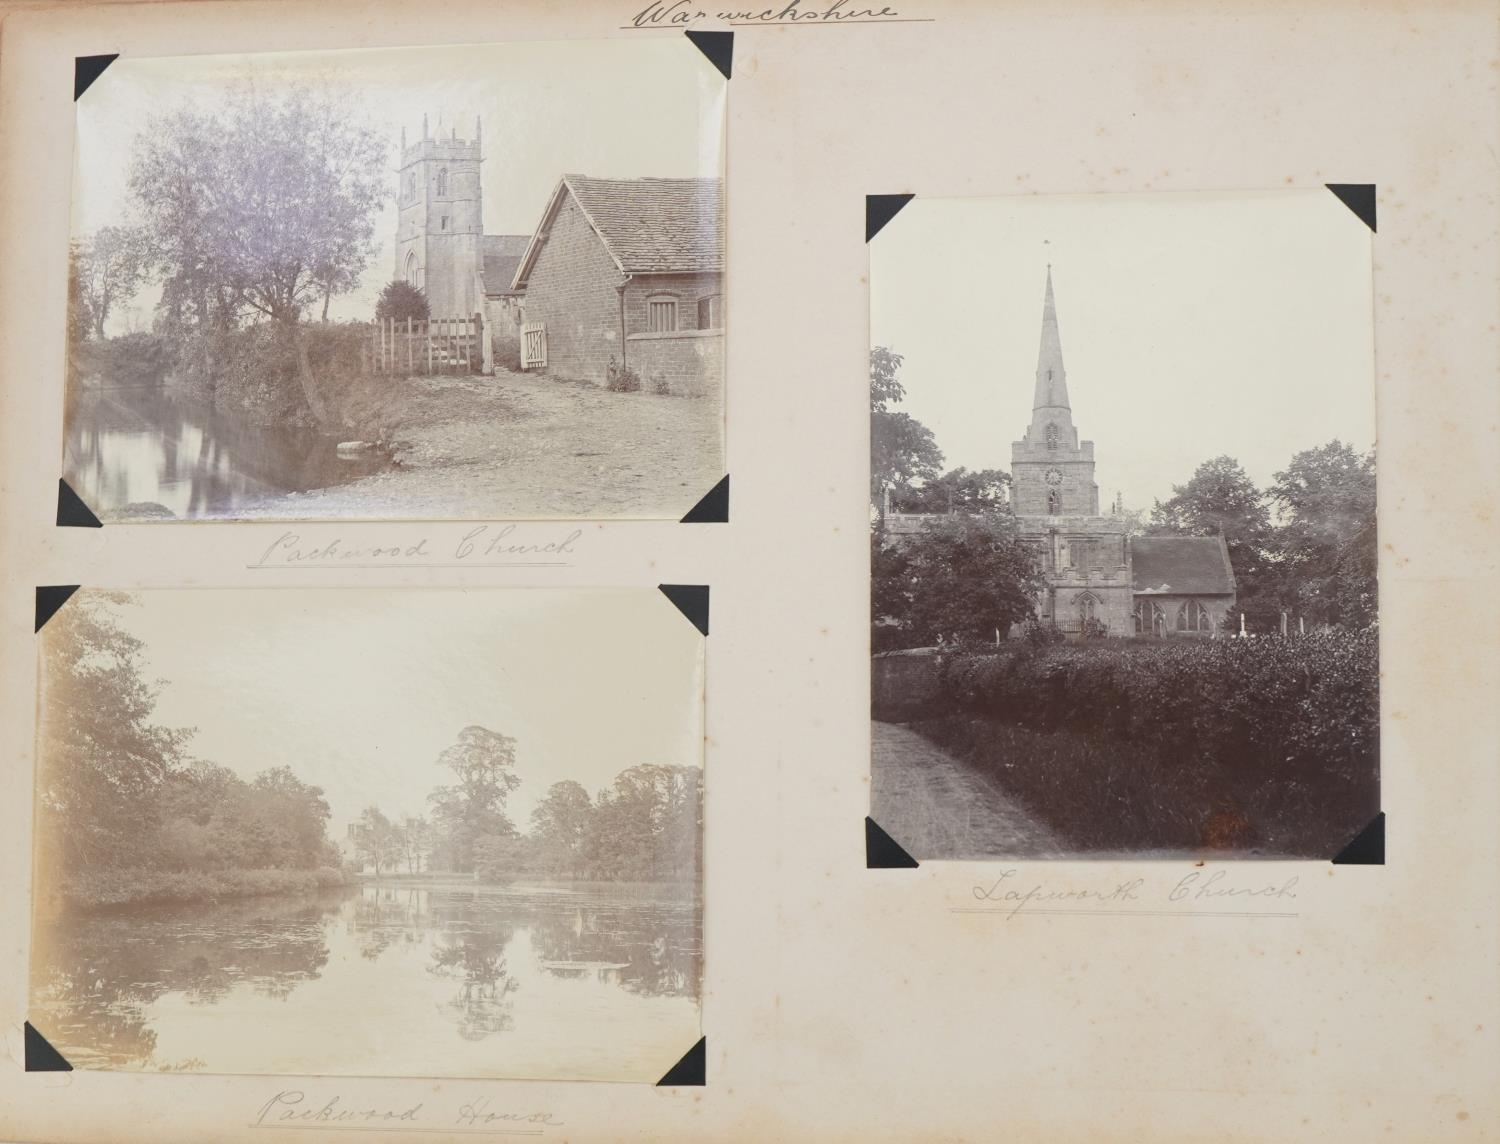 Early 20th century black and white photographs arranged in an album including Staffordshire, - Image 14 of 40